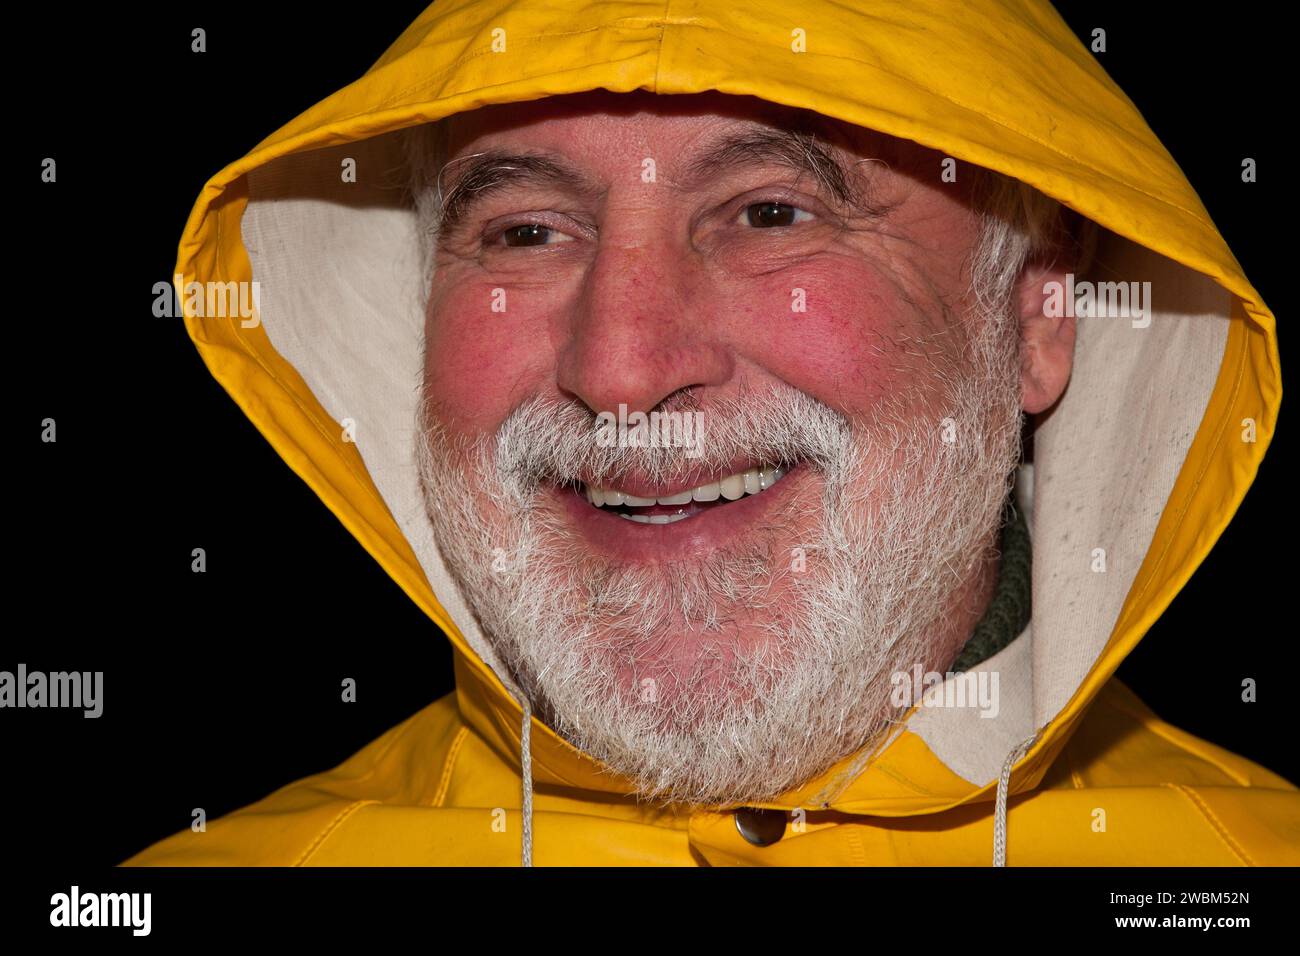 The old fisherman with a shaggy beard, yellow rain jacket and hood laughs, while the wrinkles around his eyes reveal a life story full of experiences. Stock Photo